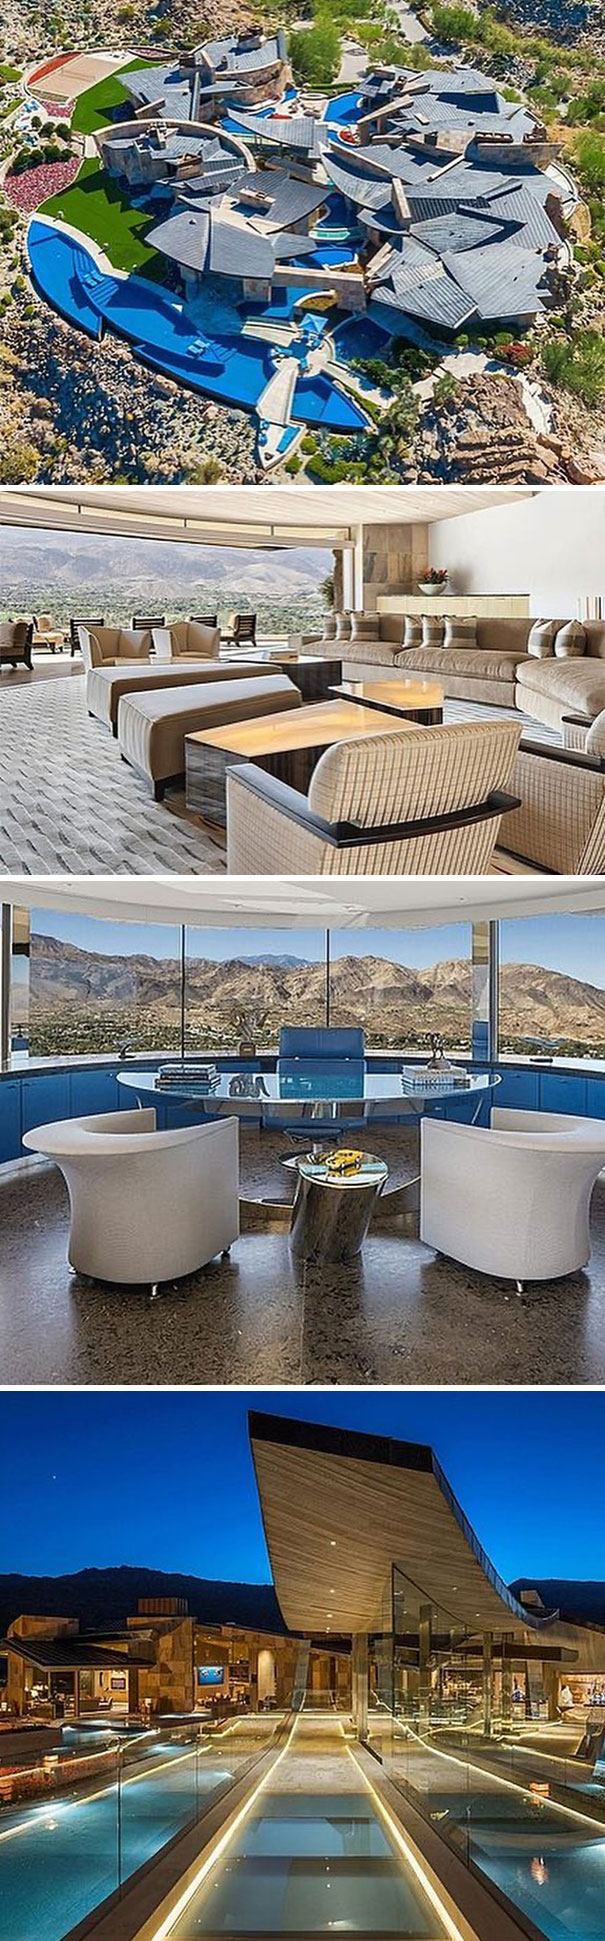 Here’s An Insane $49.5 Million 21k Square Foot Home In Palm Dessert, Ca. $49,500,000